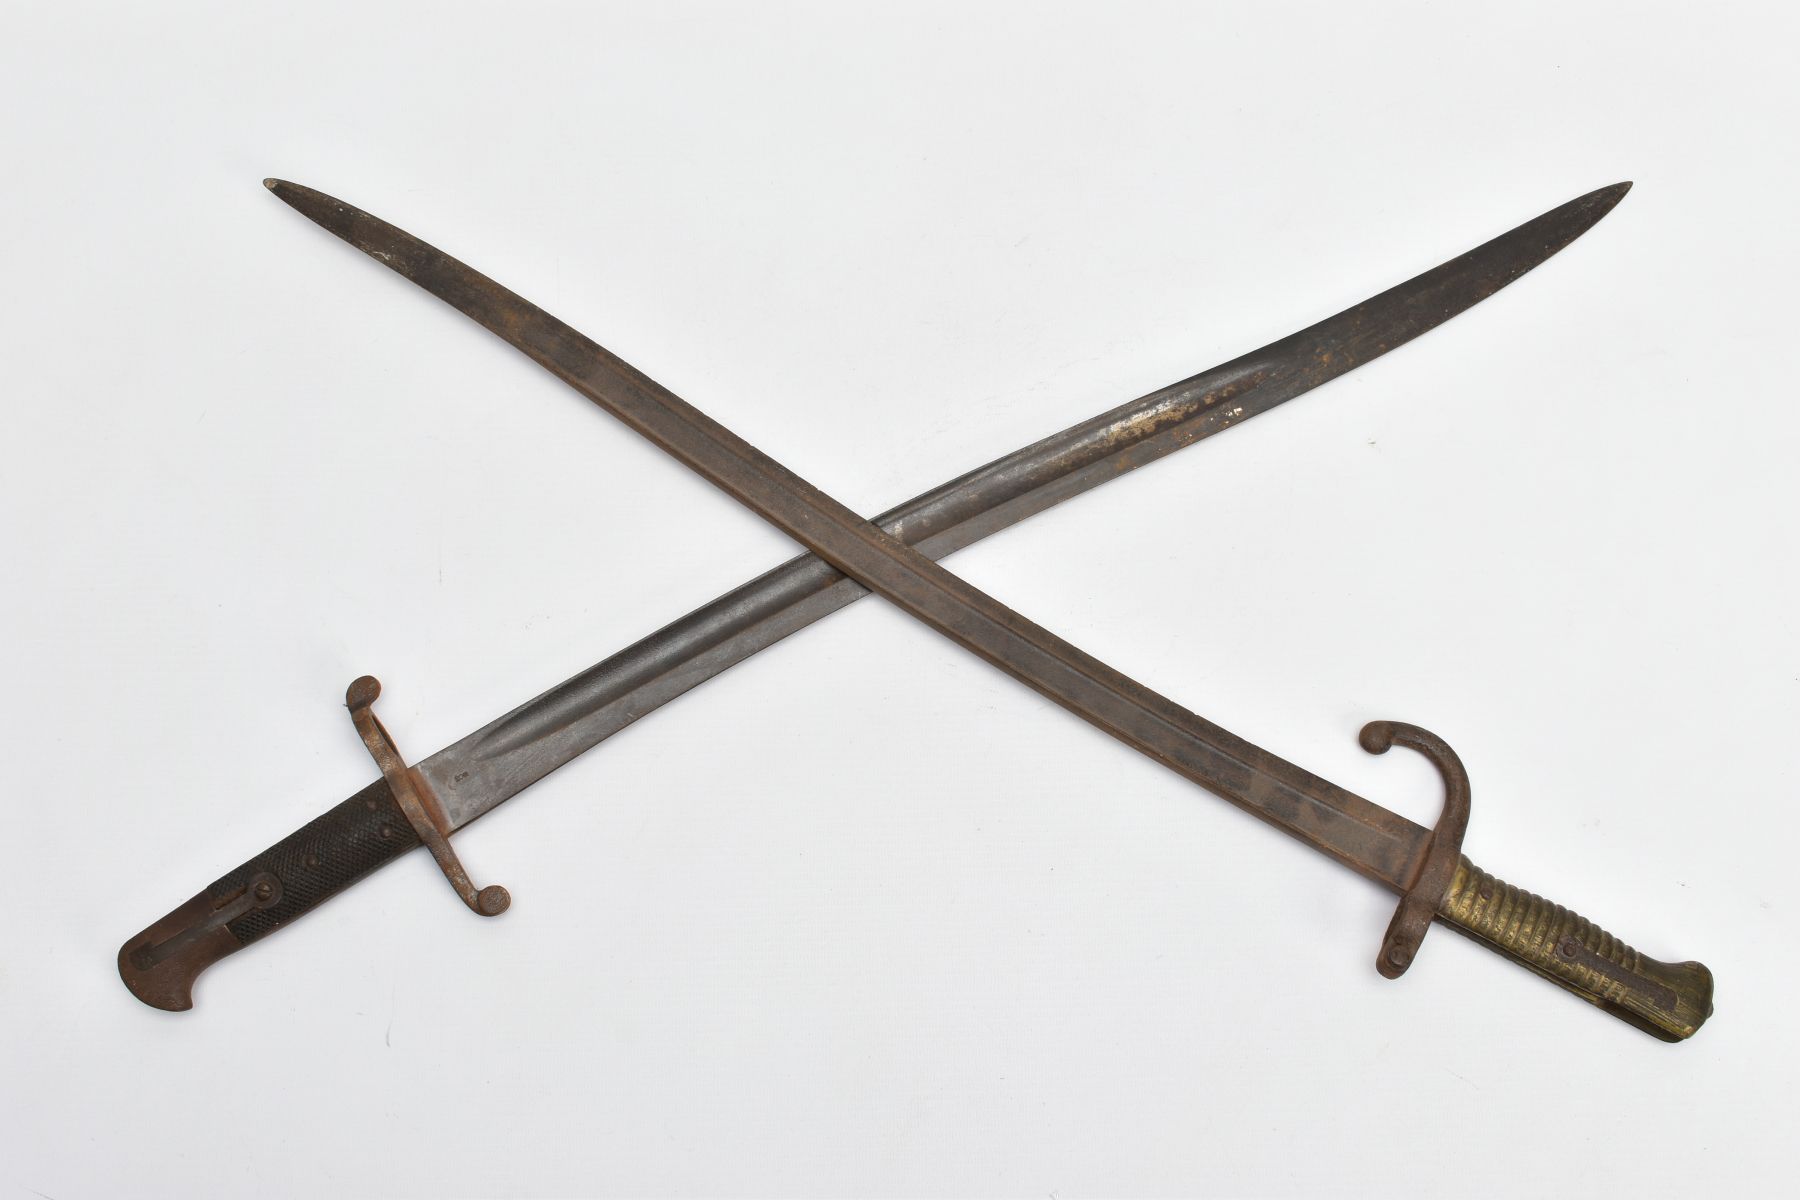 TWO x FRENCH? YATAGHAN STYLE RIFLE BAYONET, both have fullered blades lengths are approximately 58cm